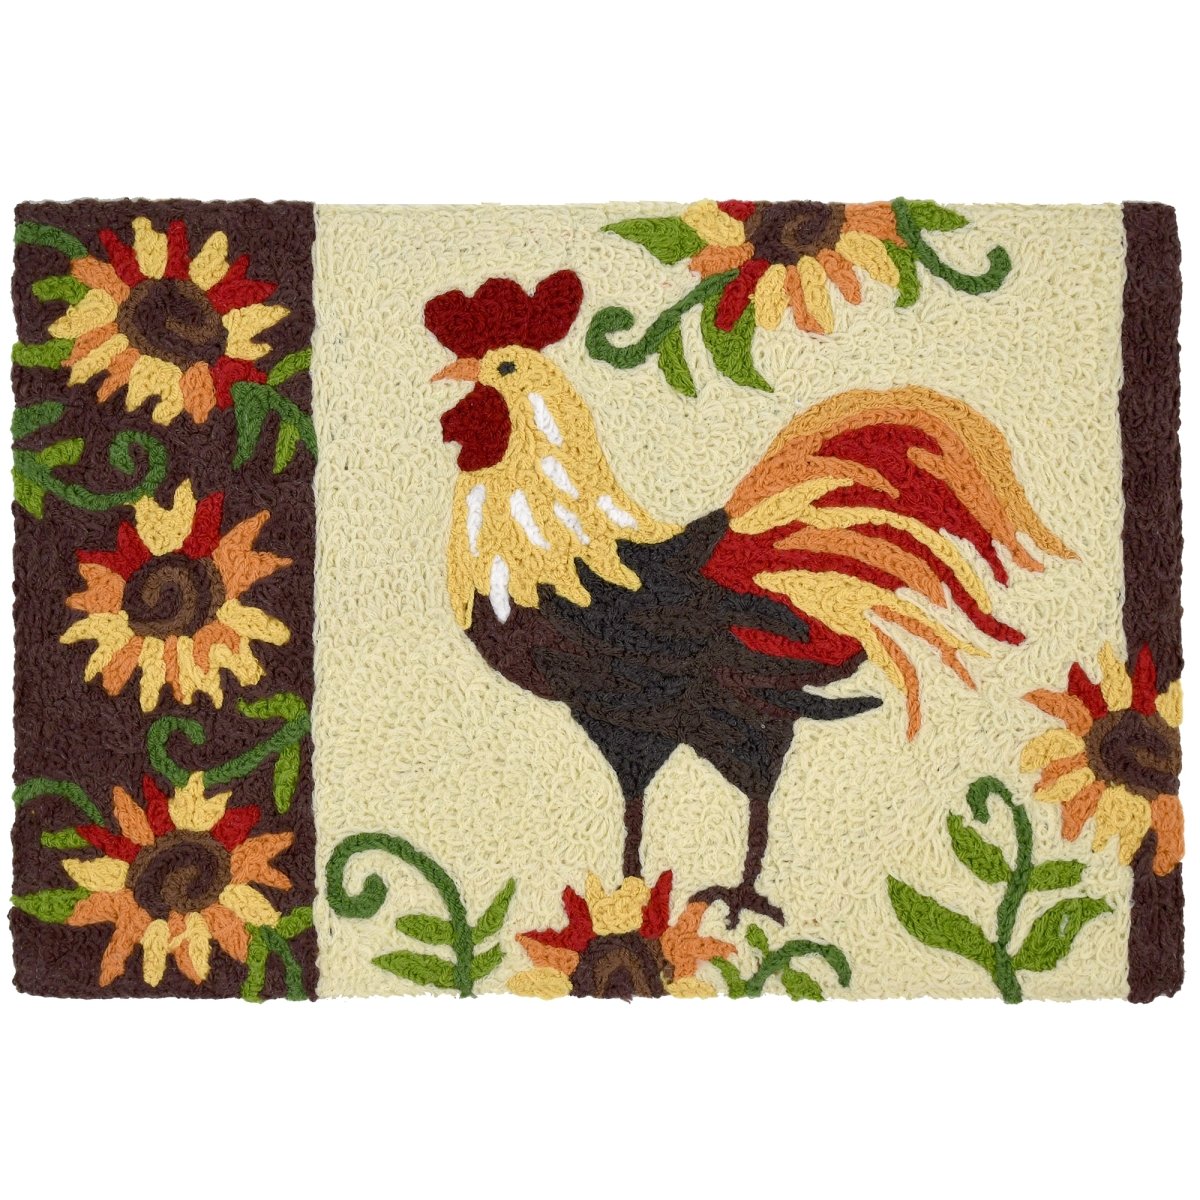 Jb-hv009 20 X 30 In. Rooster, Sunflowers Indoor & Outdoor Accent Rug